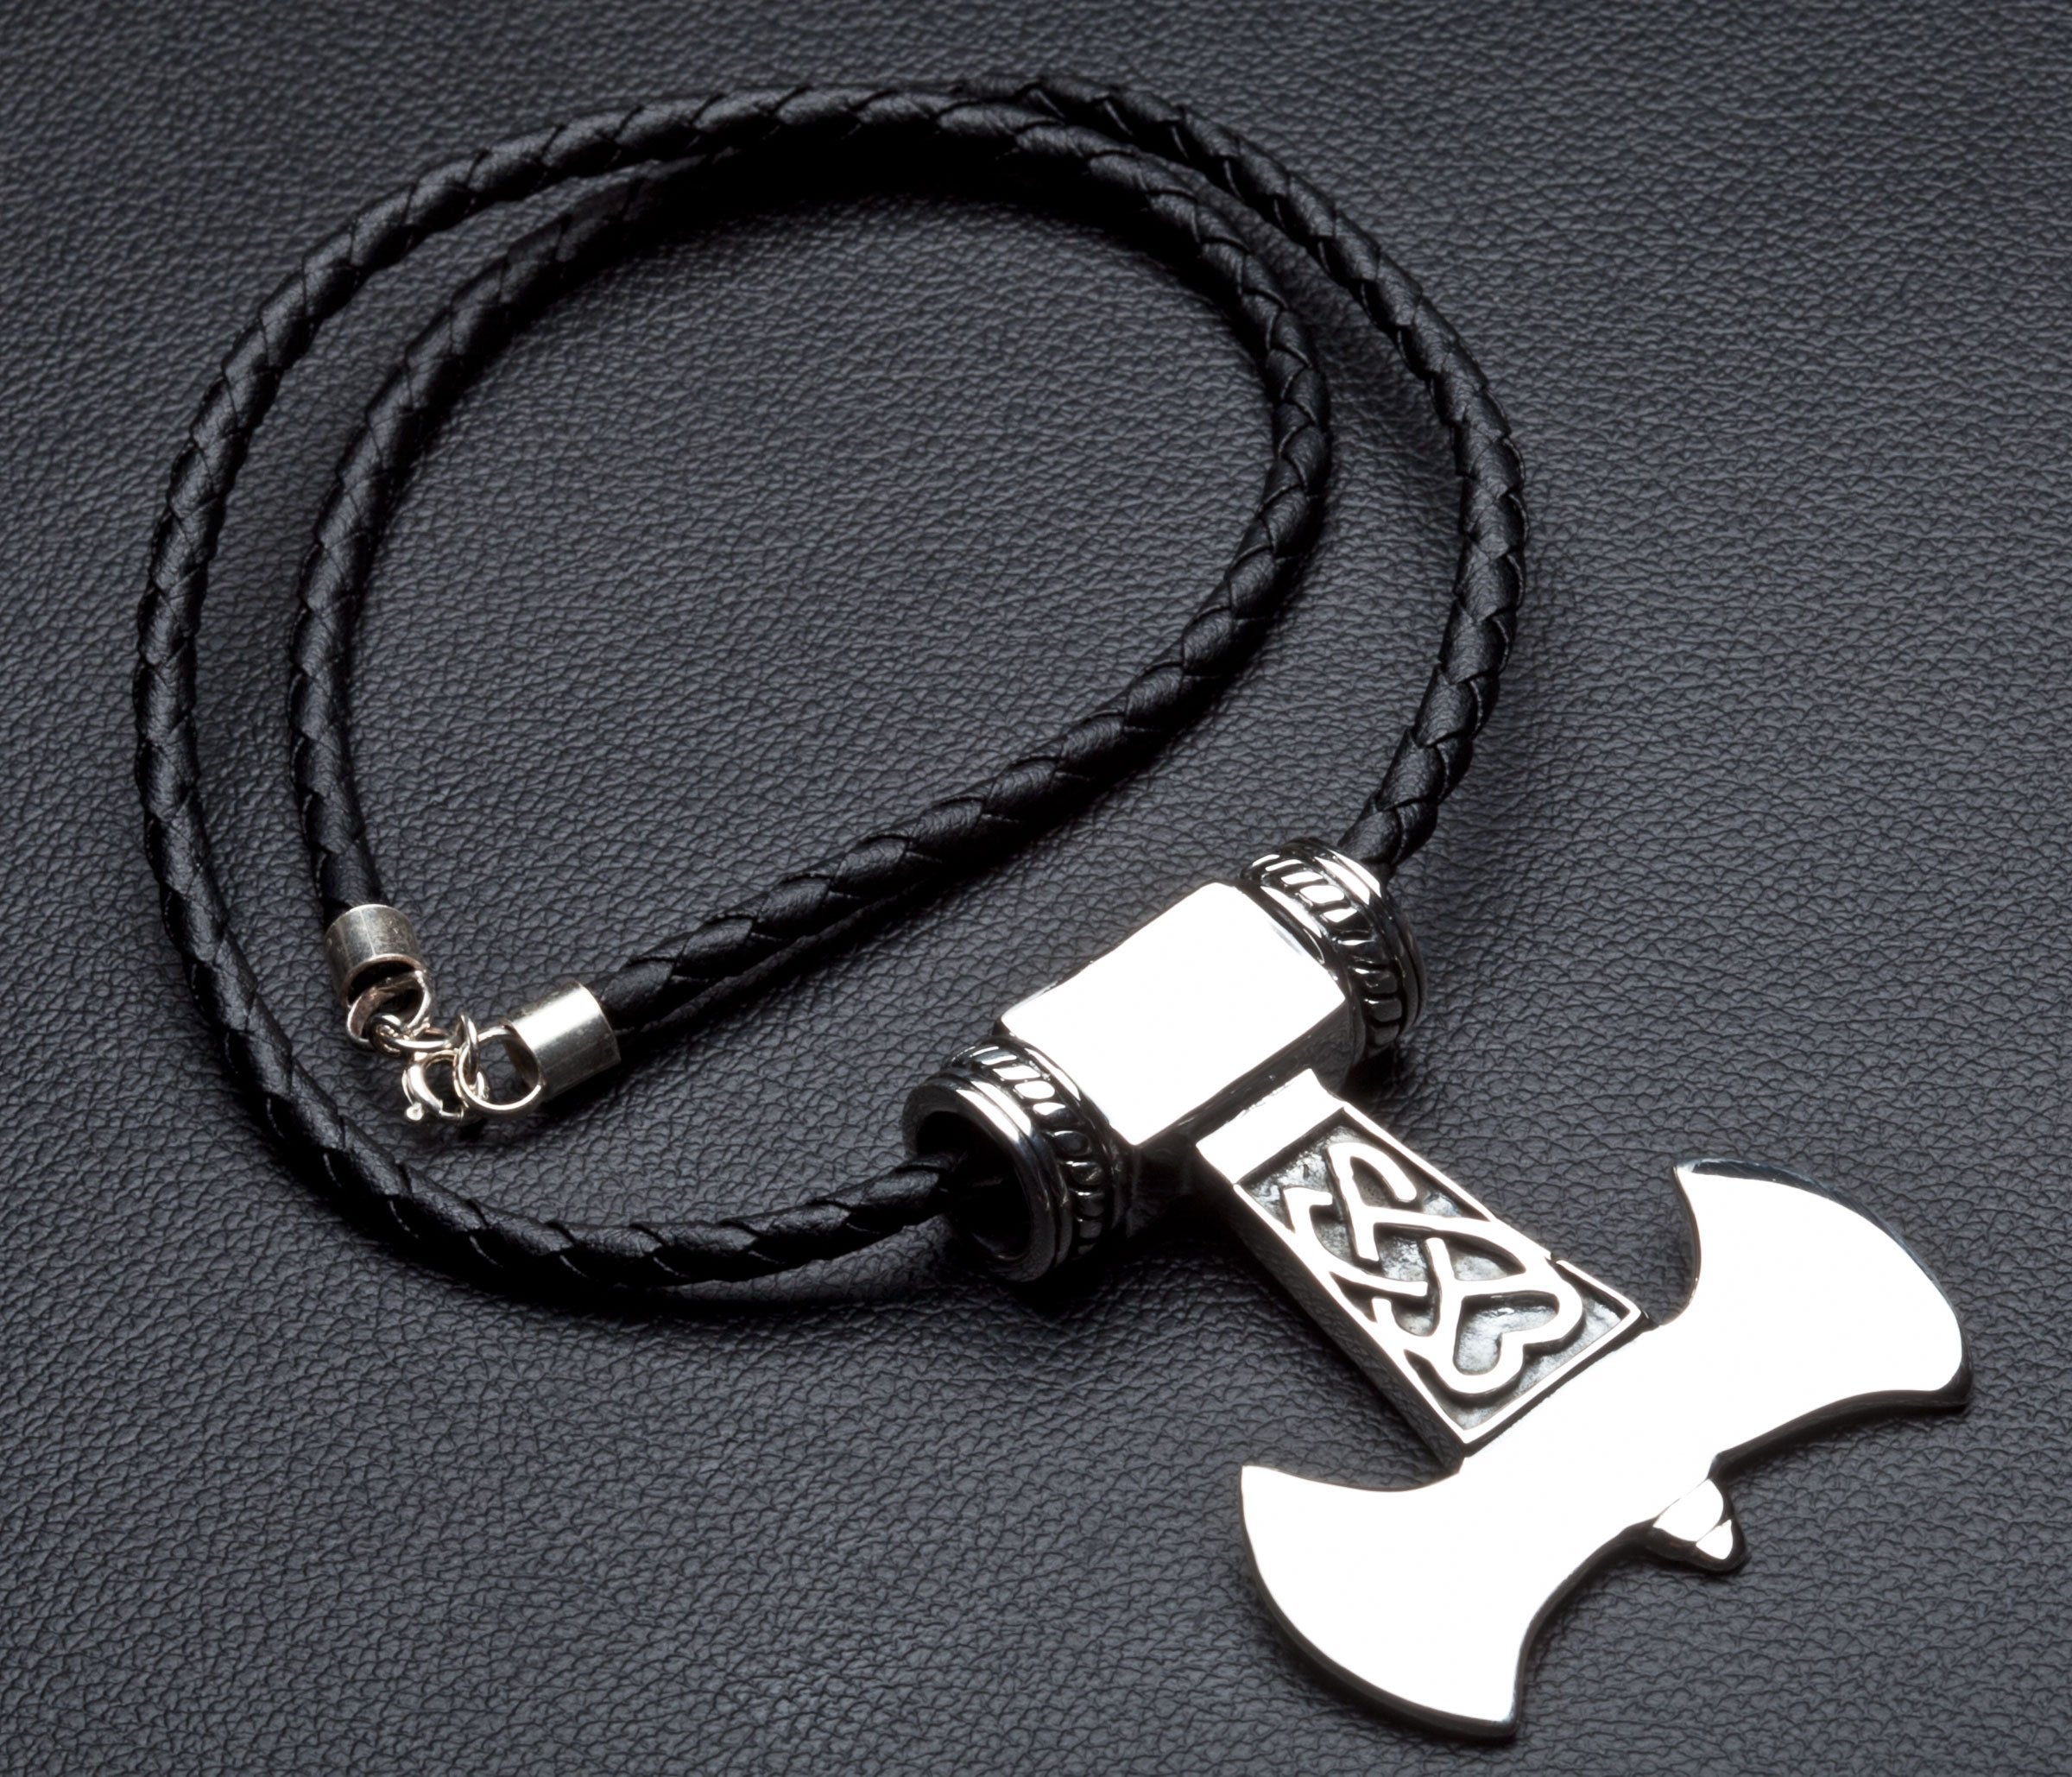 Quality Viking/Mjolnir/Thors Hammer Stainless Steel Gold/Silver Amulet  Necklace | eBay